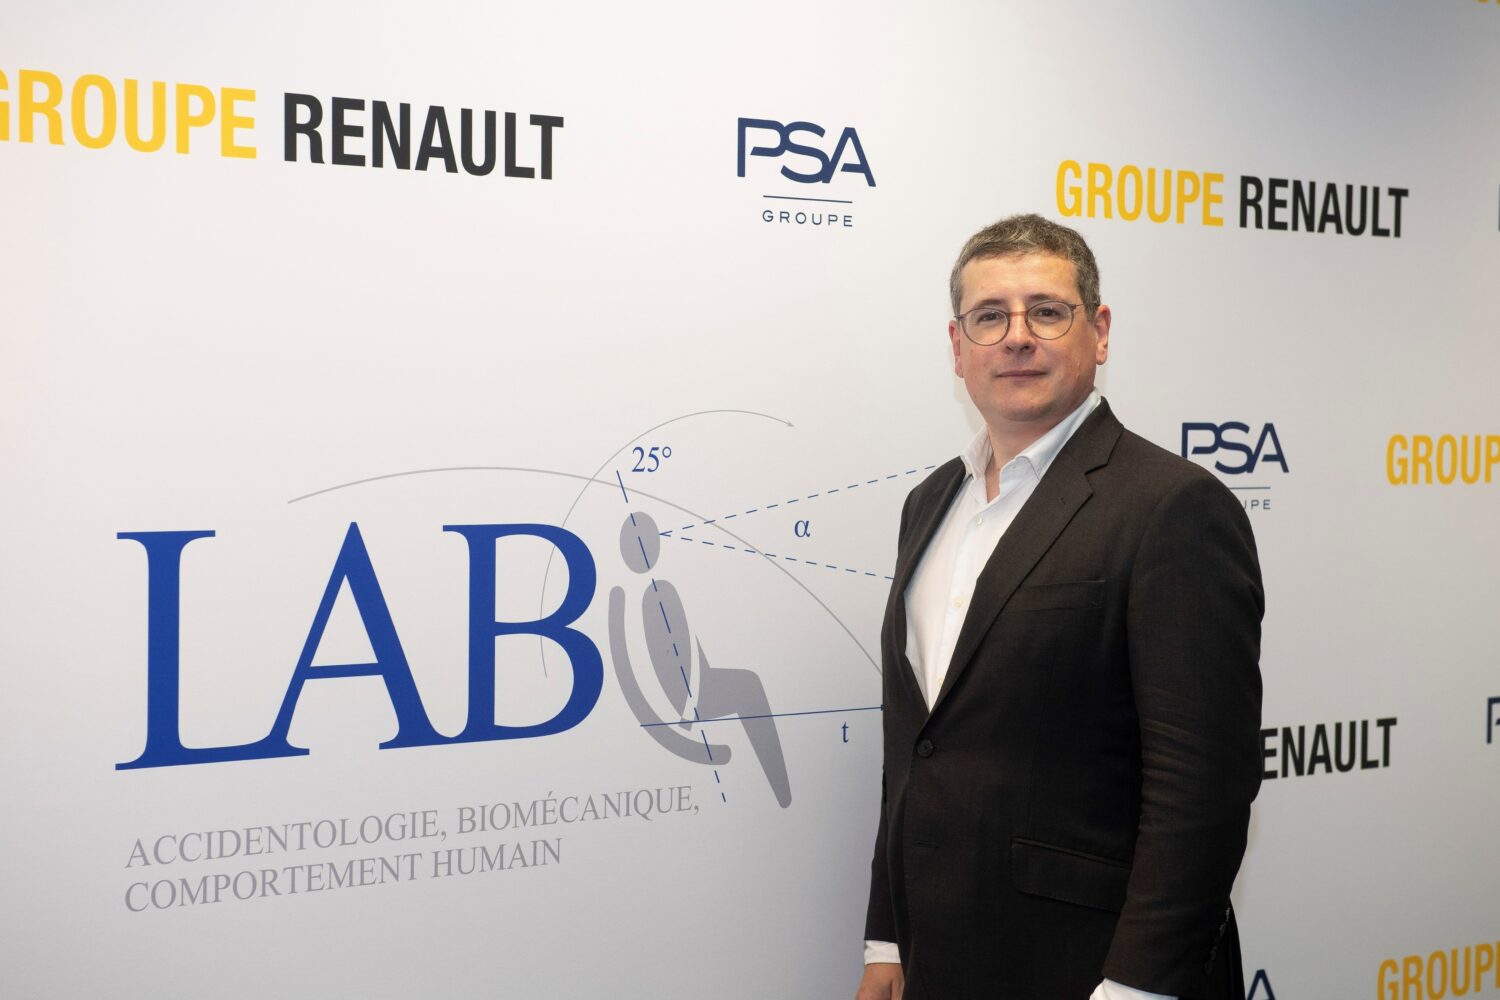 2019 - The LAB: 50 years of collaborative work between Groupe PSA and Groupe Renault